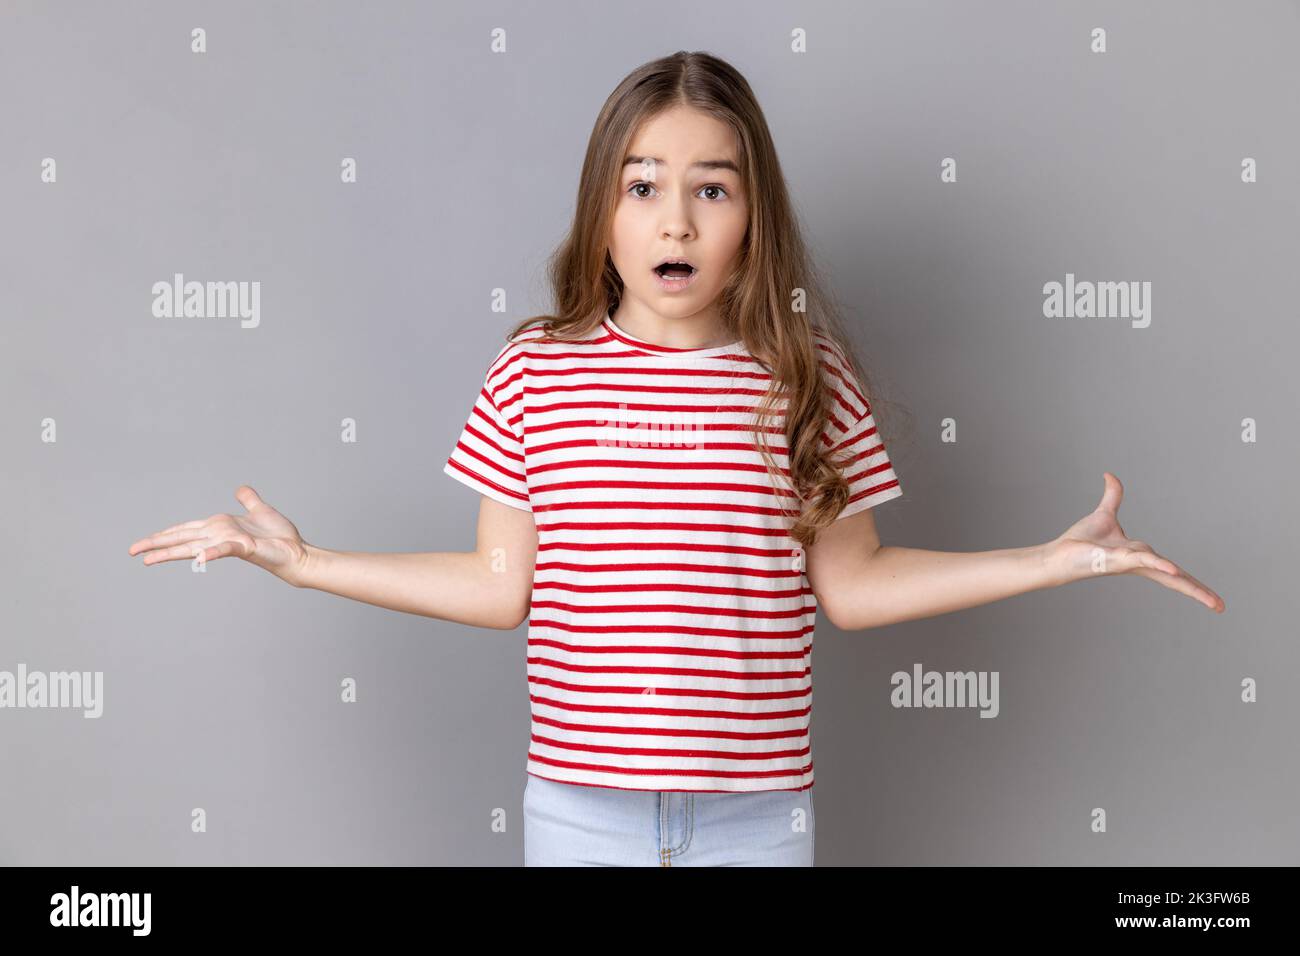 What do you want. Portrait of little girl wearing striped T-shirt standing with raised hands and surprised indignant expression, asking what reason. Indoor studio shot isolated on gray background. Stock Photo